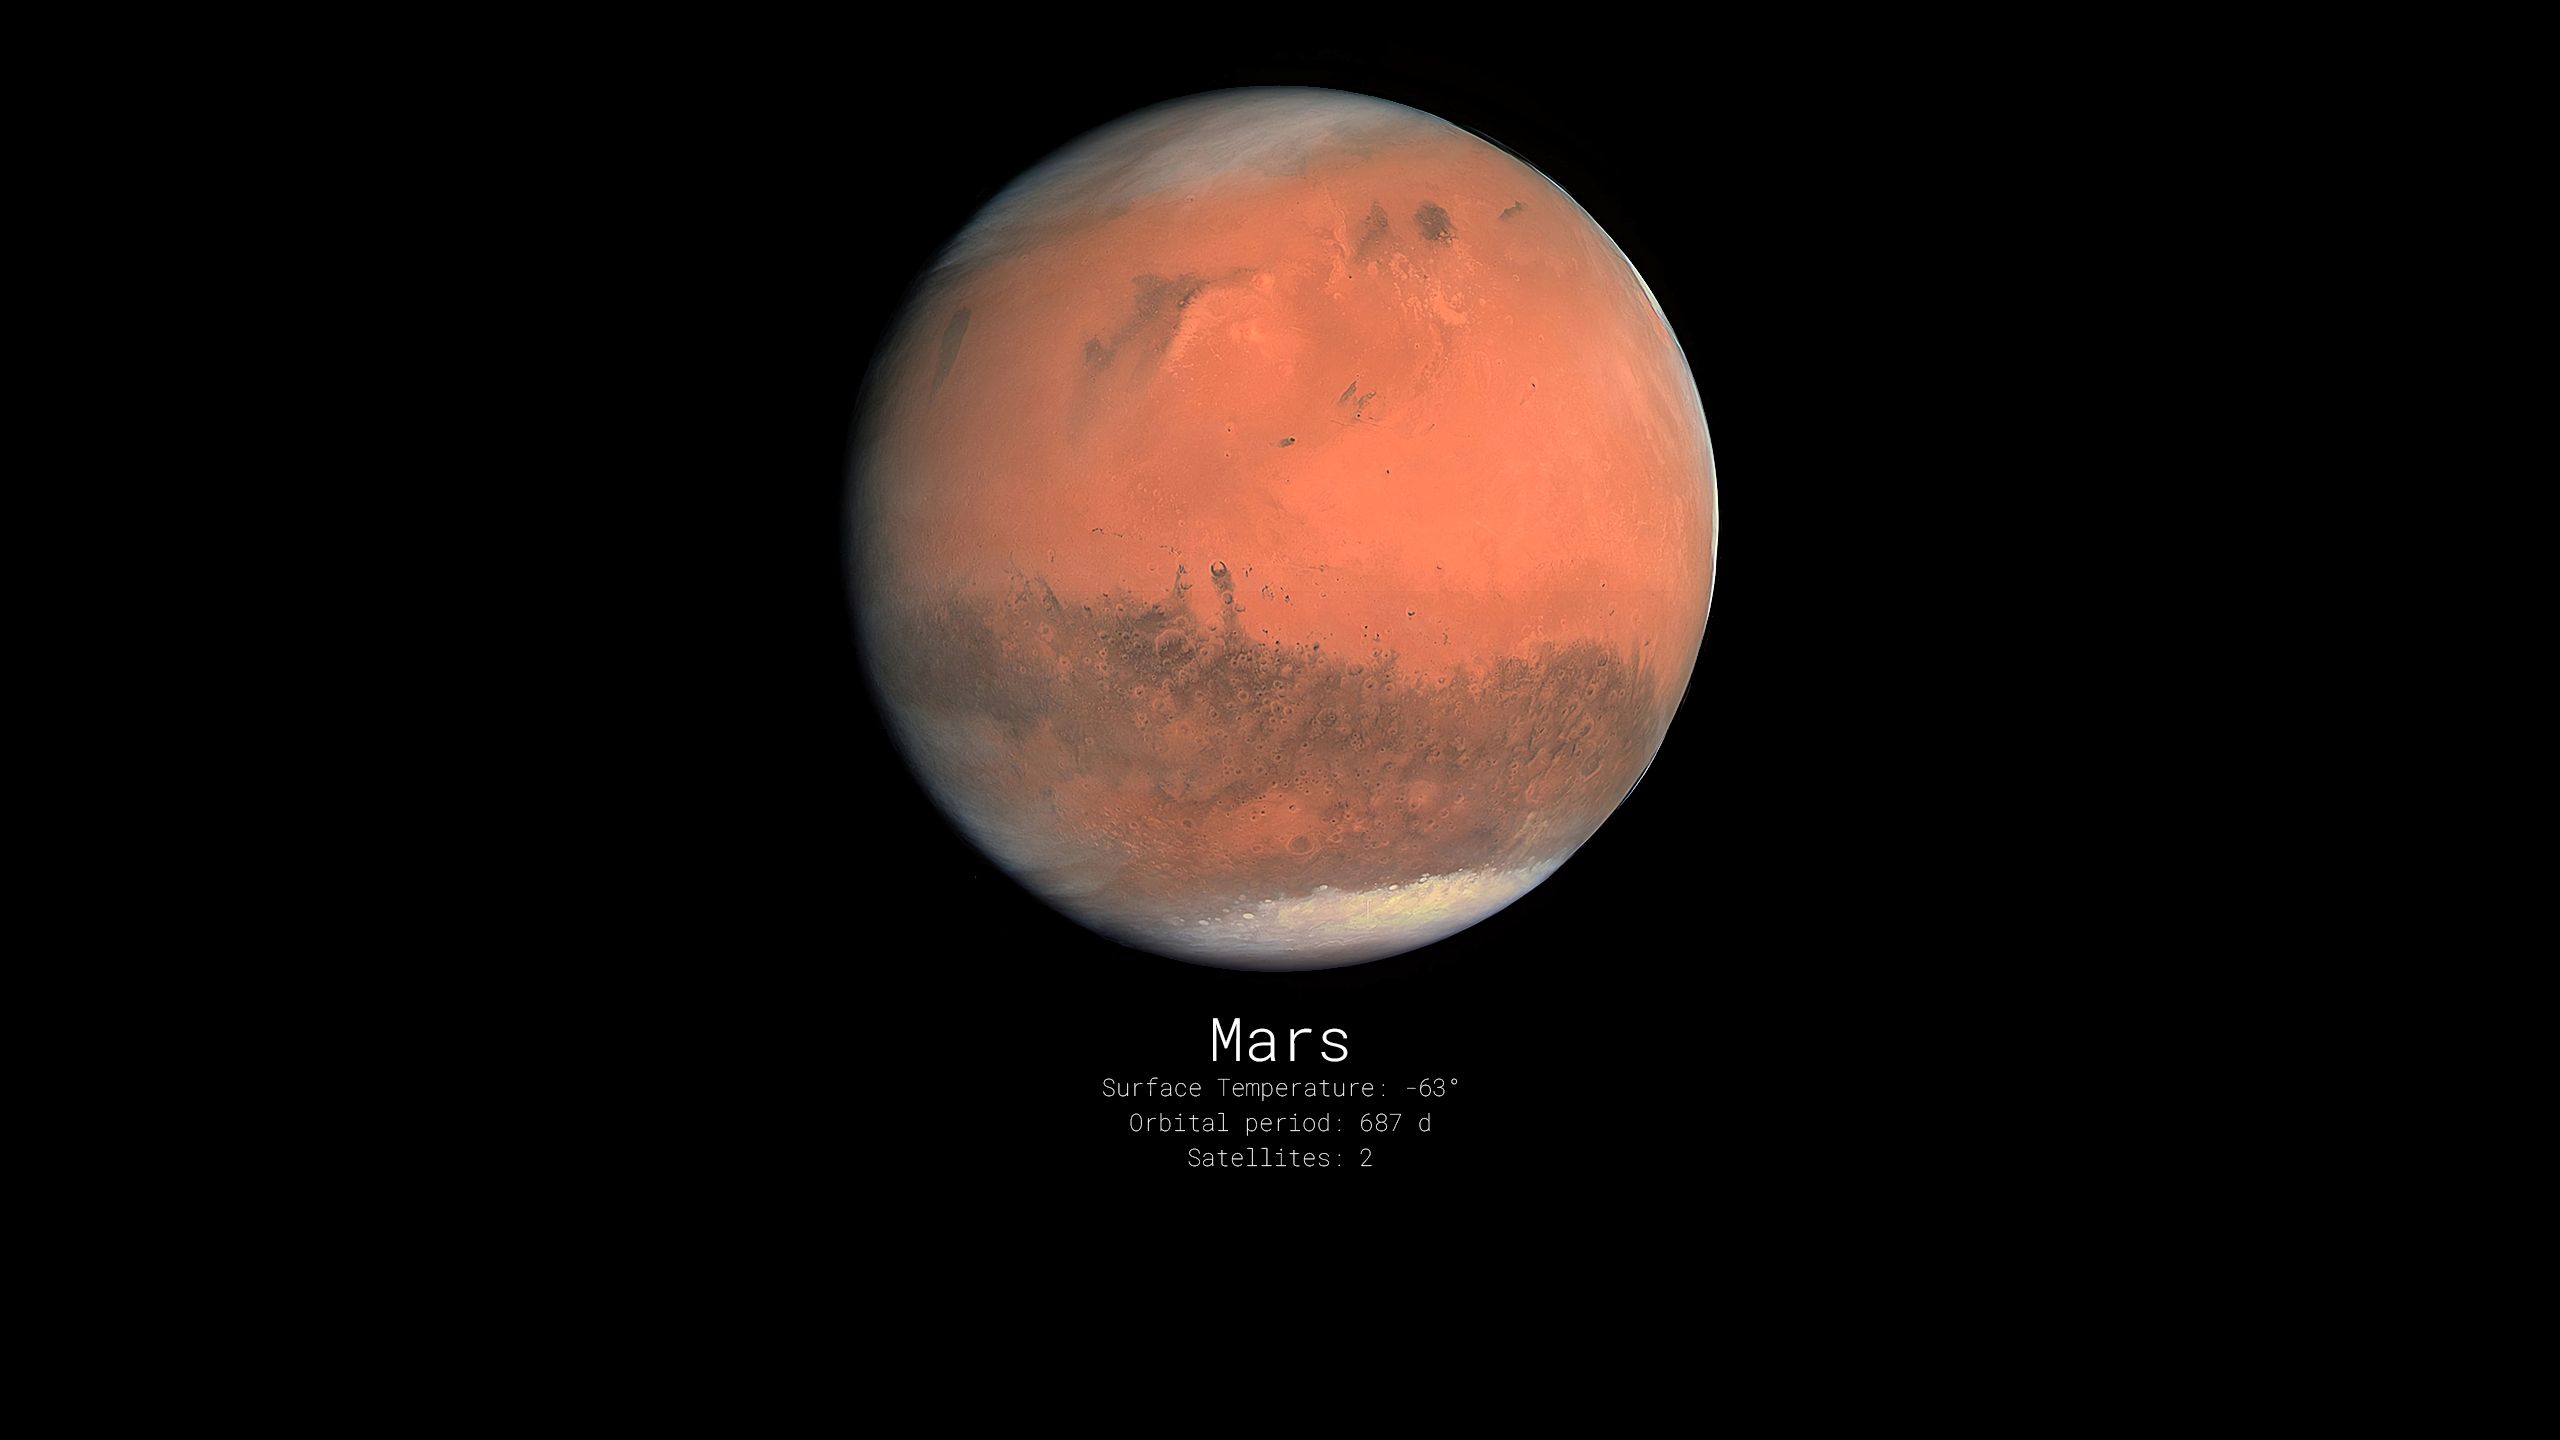 Mars 4K wallpaper for your desktop or mobile screen free and easy to download